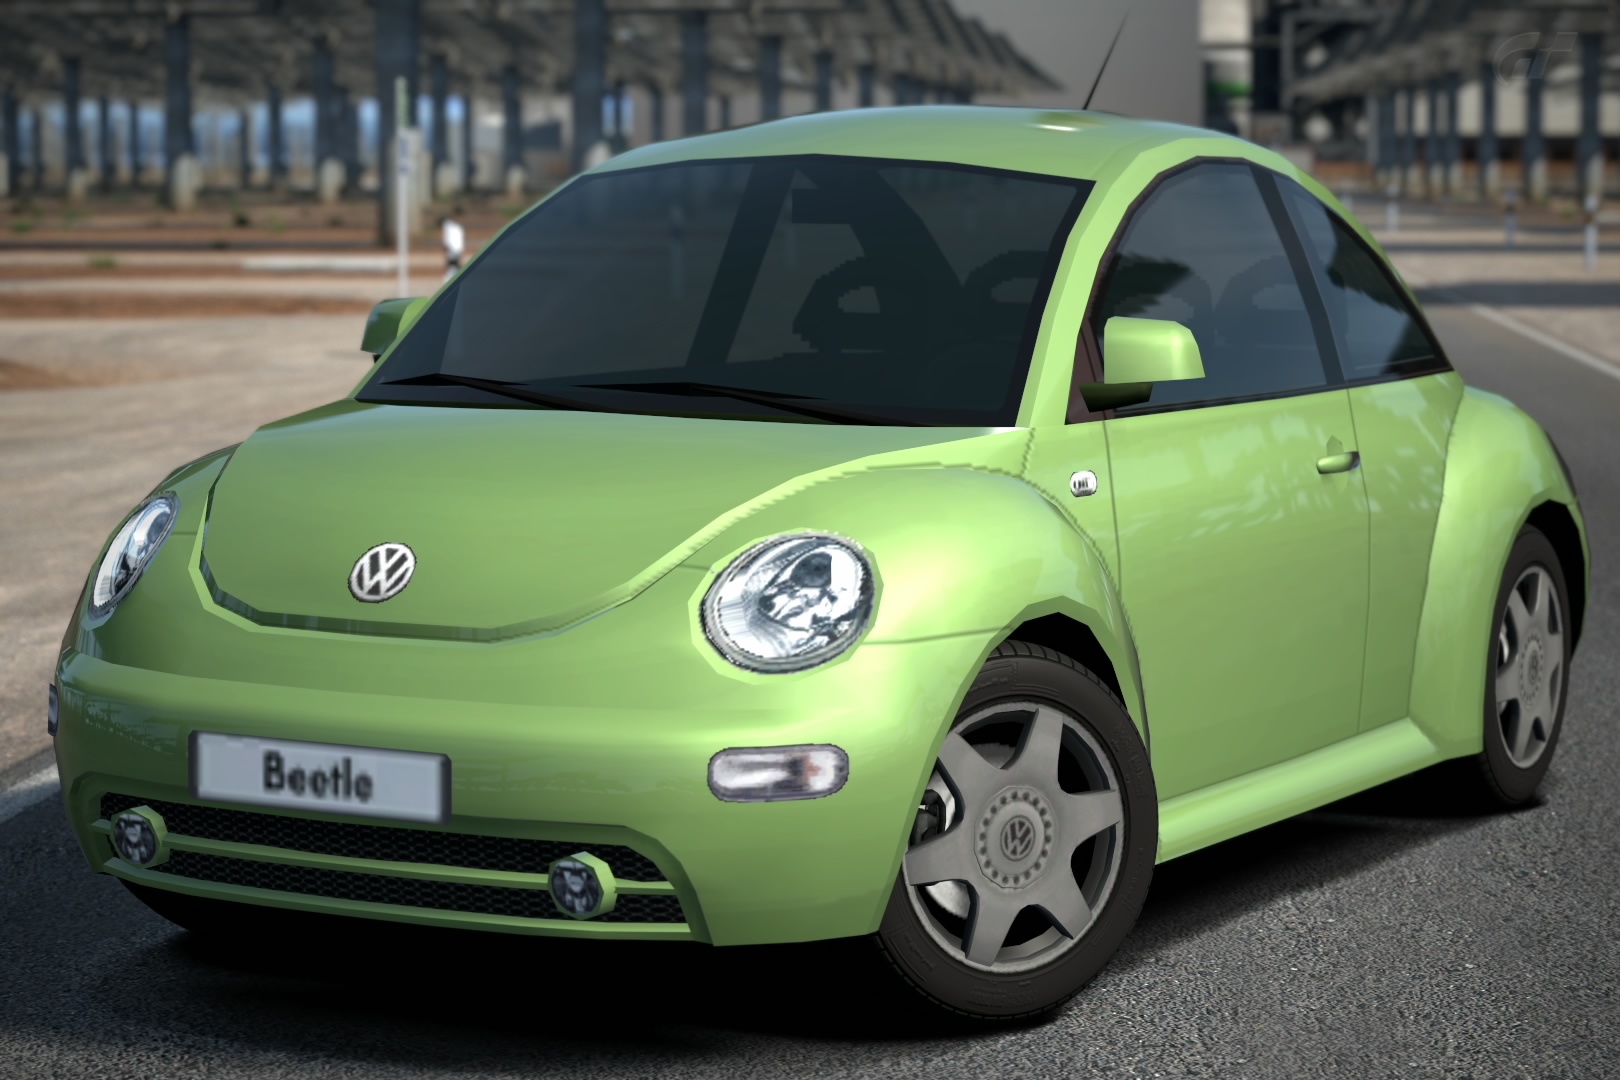 https://static.wikia.nocookie.net/gran-turismo/images/3/36/Volkswagen_New_Beetle_2.0_%2700.jpg/revision/latest?cb=20181110155411